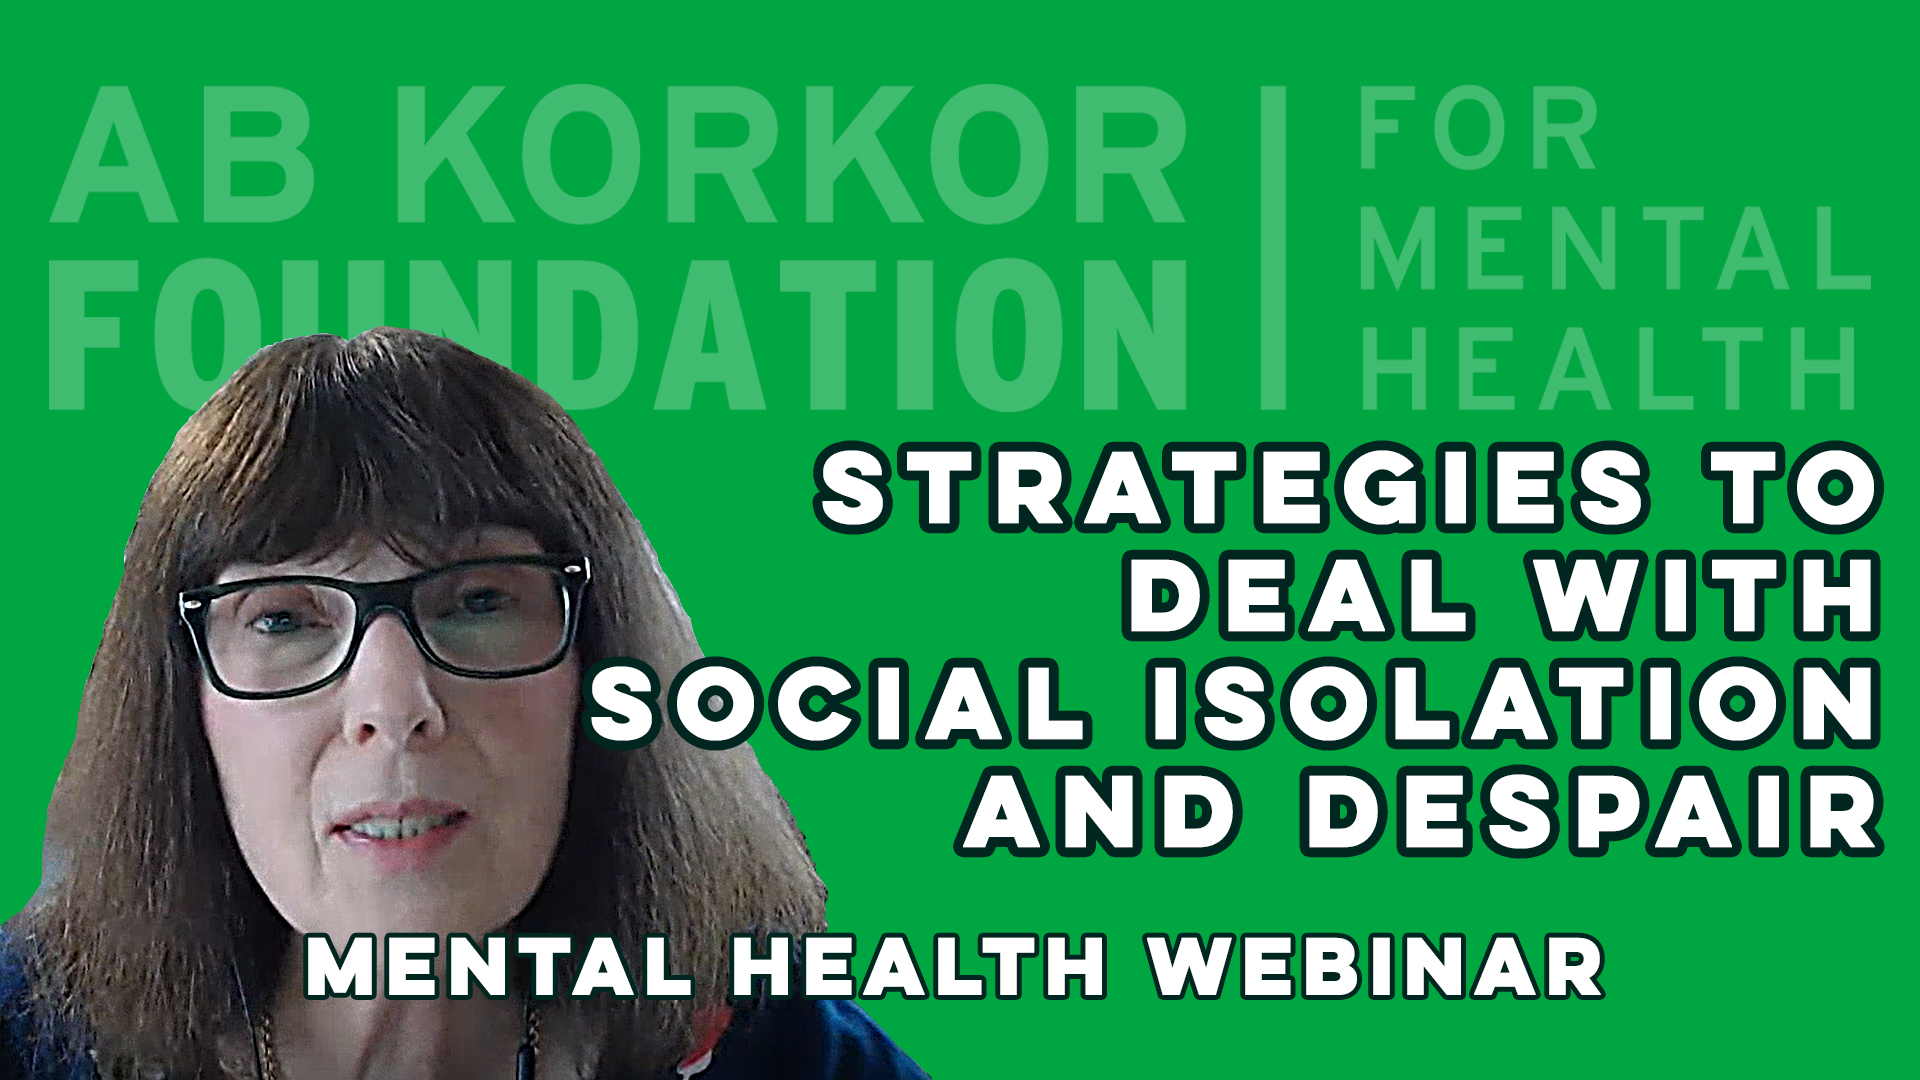 Strategies to Deal with Isolation and Despair - Barbara Moser - Mental Health Webinar